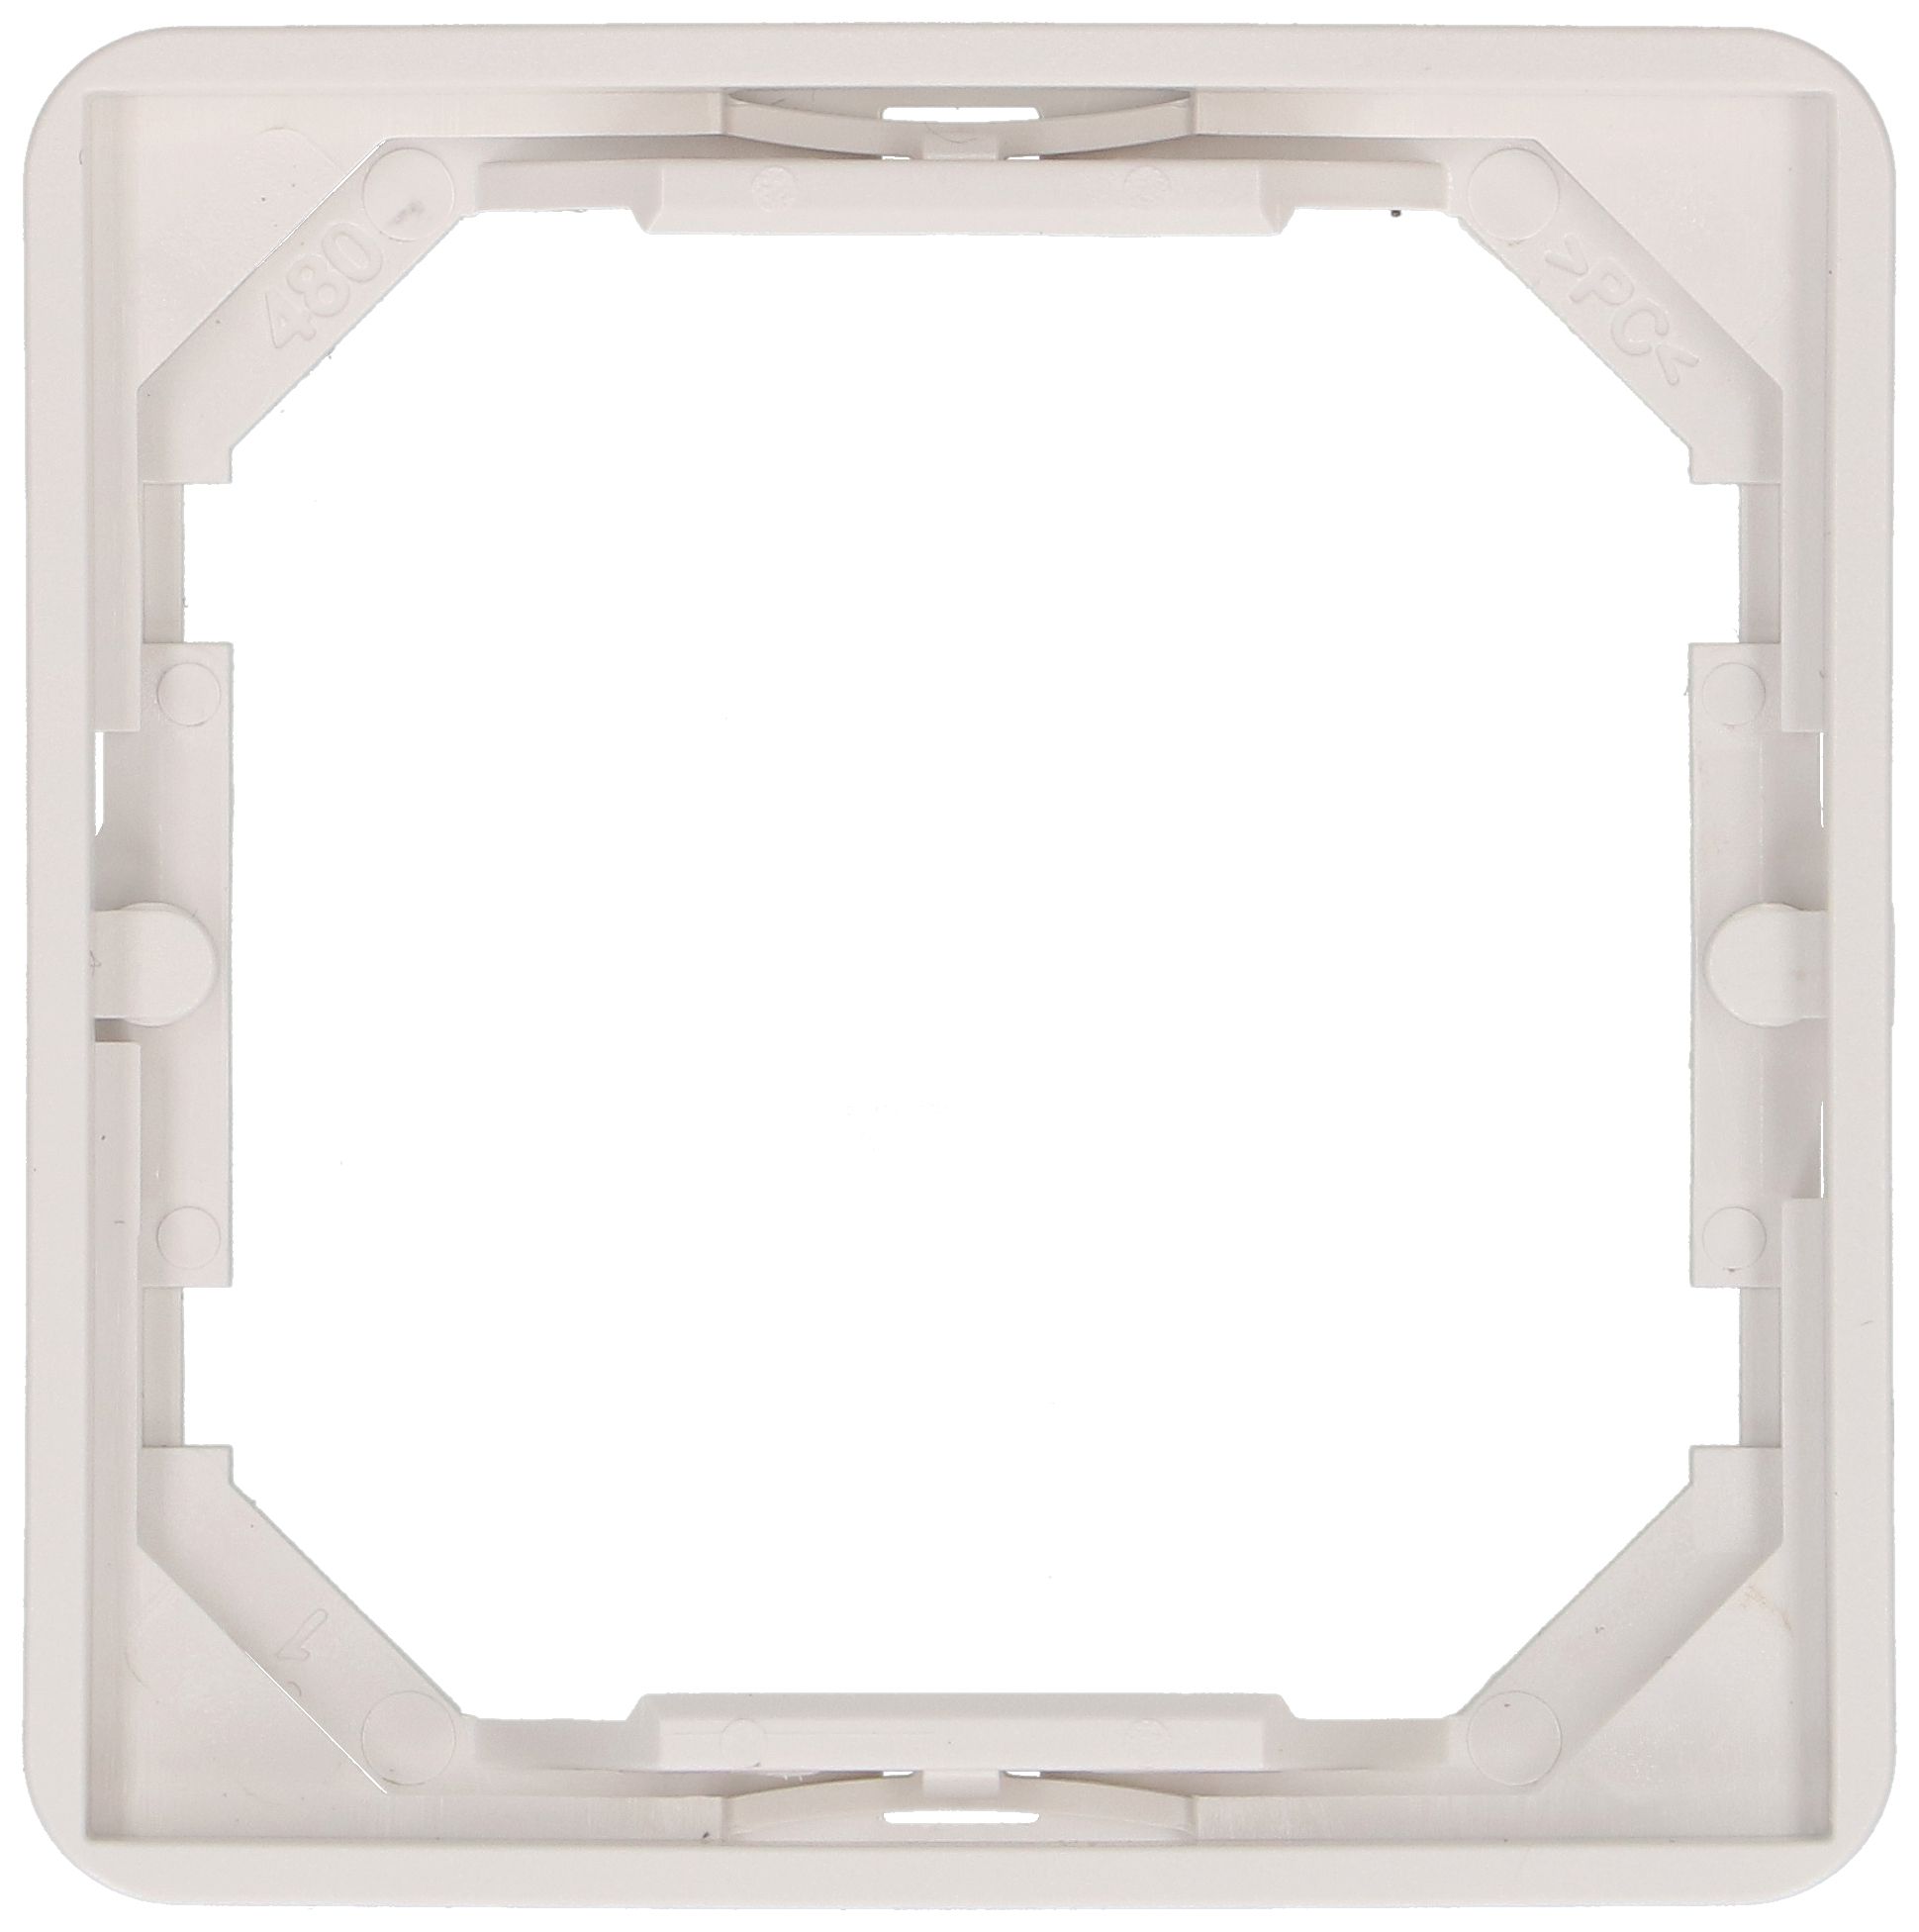 Frontplate to Loxone white, priamos